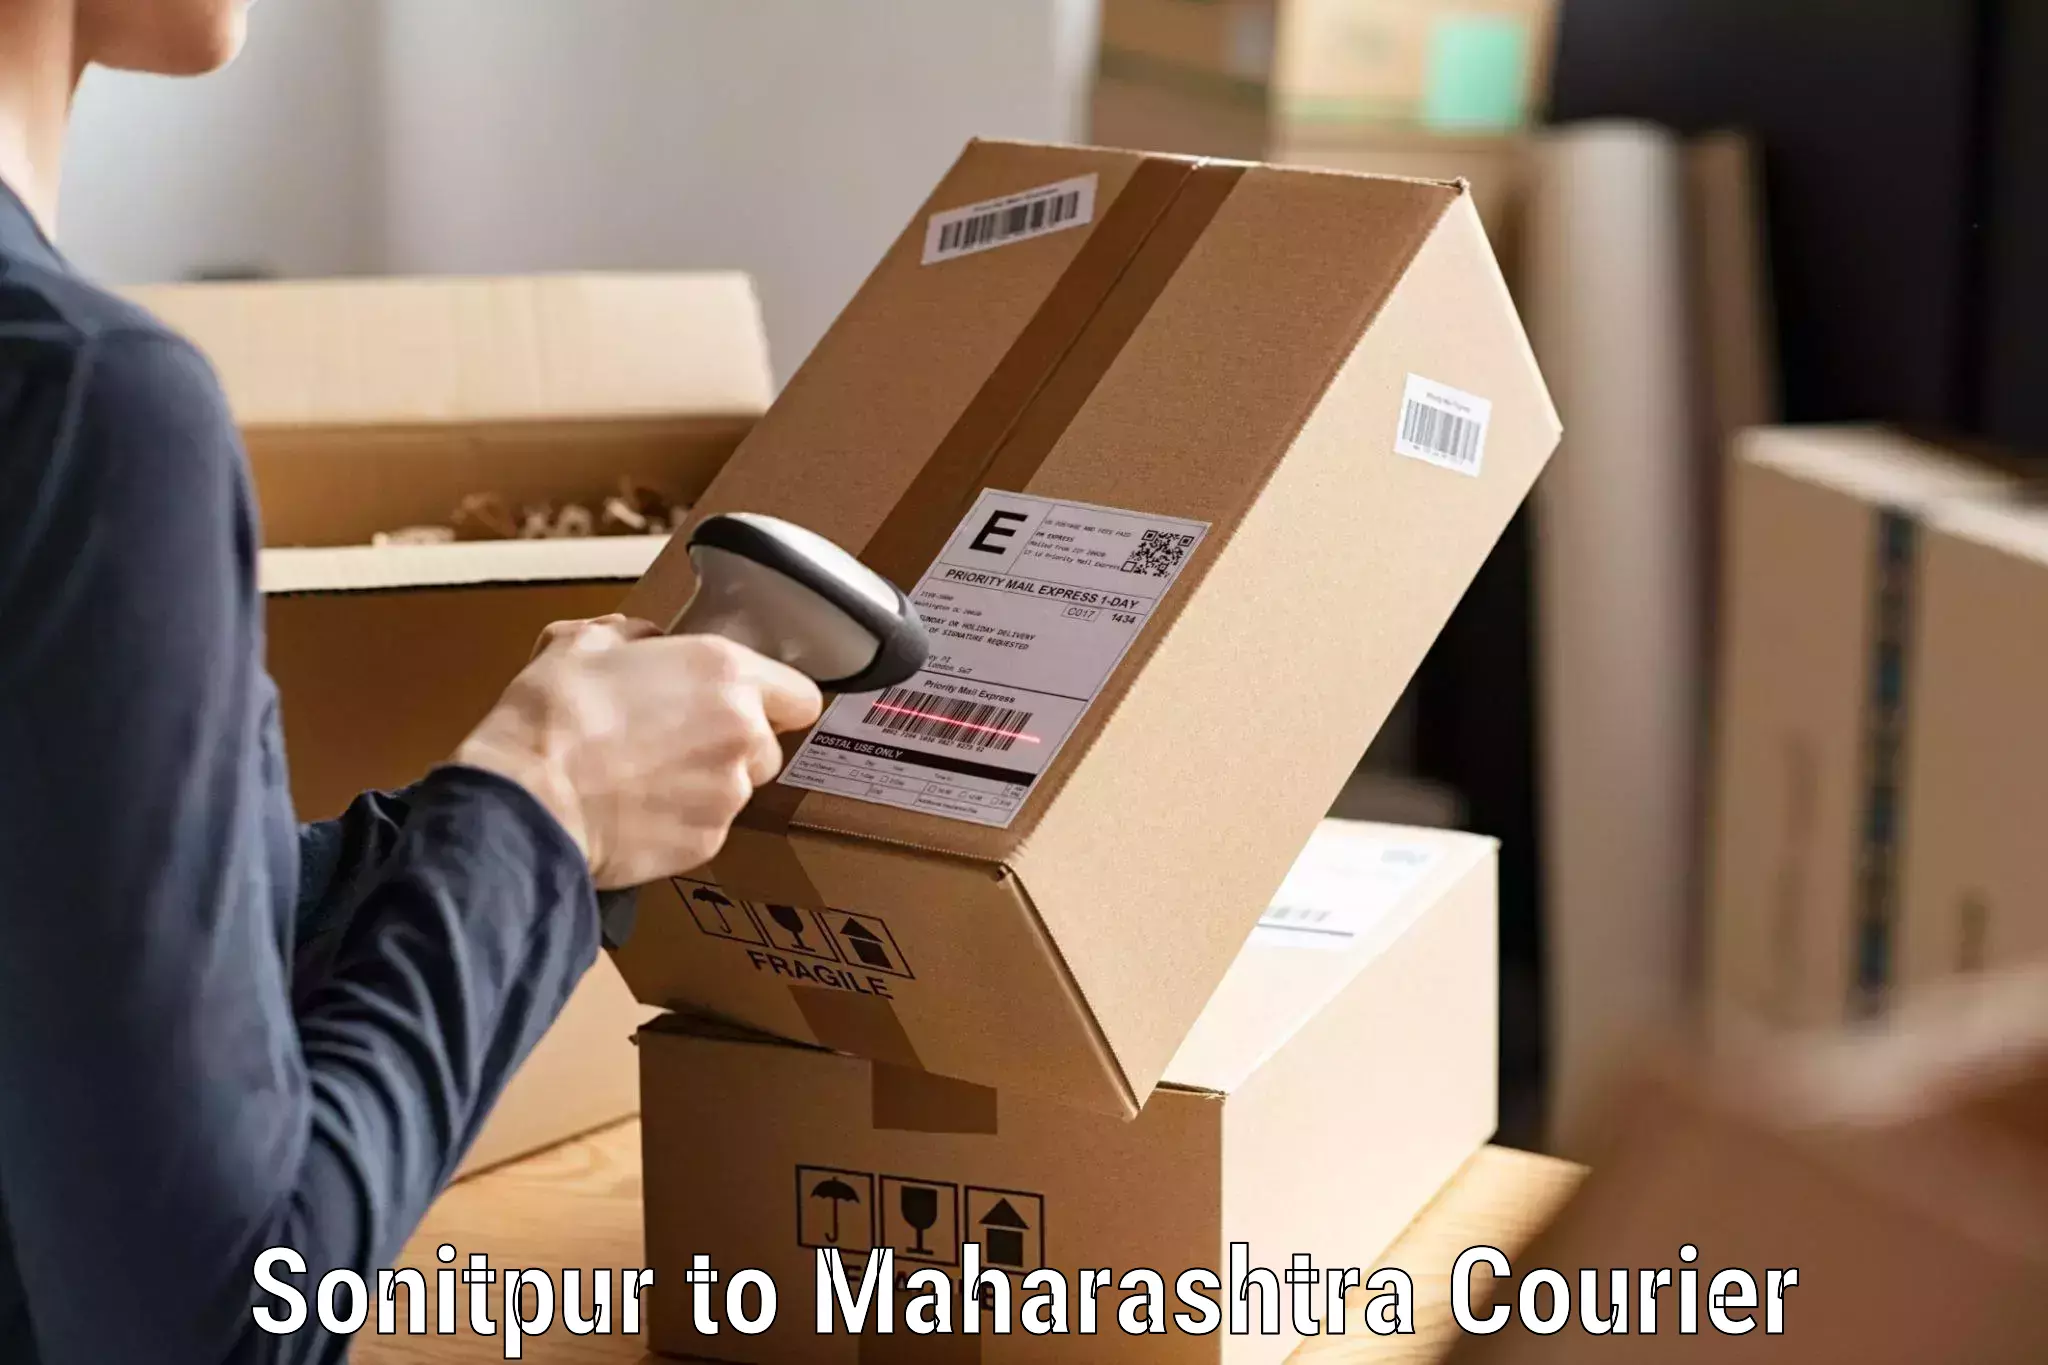 Global parcel delivery Sonitpur to Ballarpur